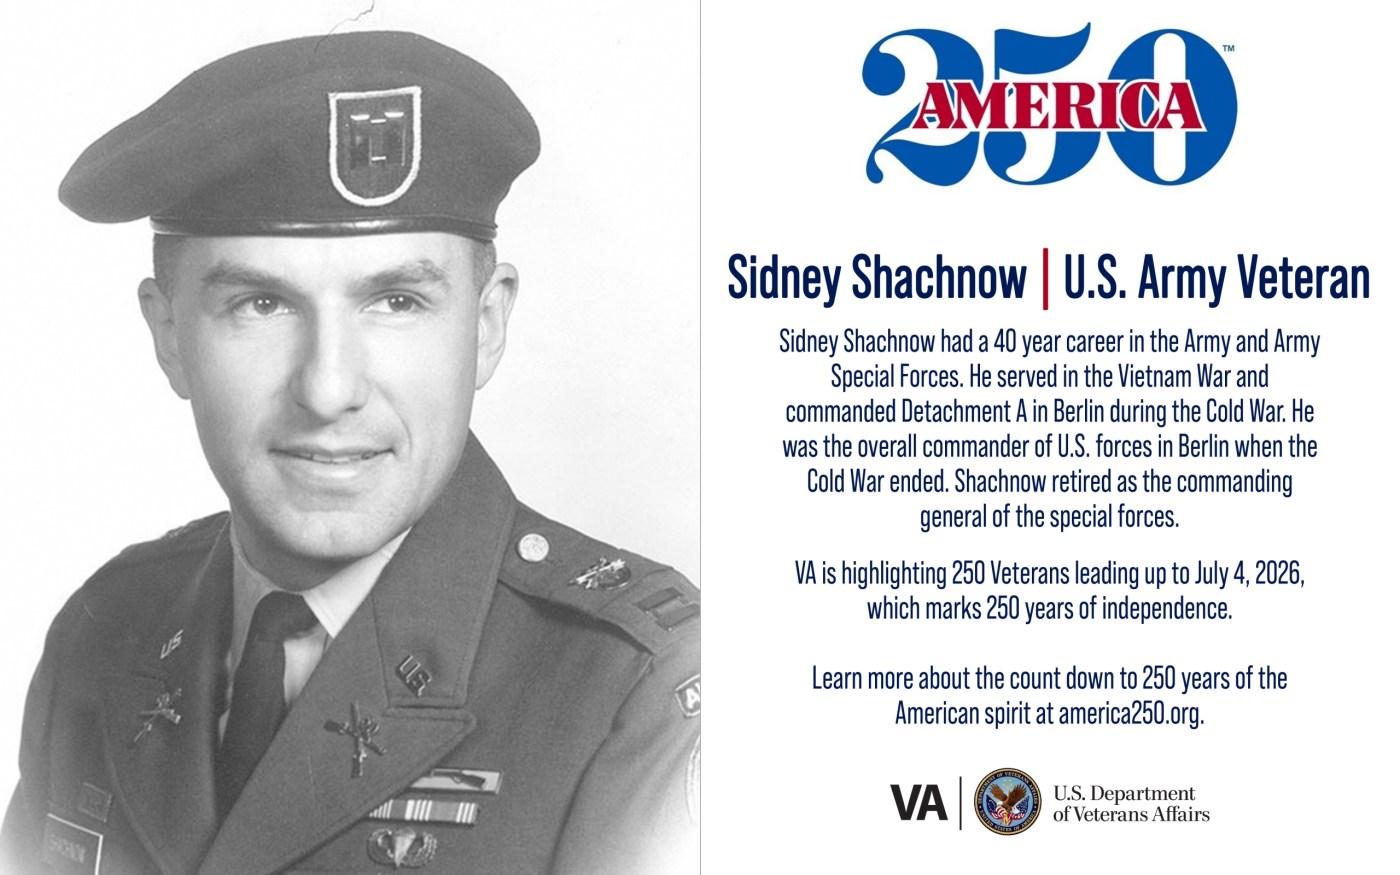 This week’s America250 salute is Army Veteran Sidney Shachnow, a special forces commander who oversaw U.S. forces during the Berlin Wall fall.